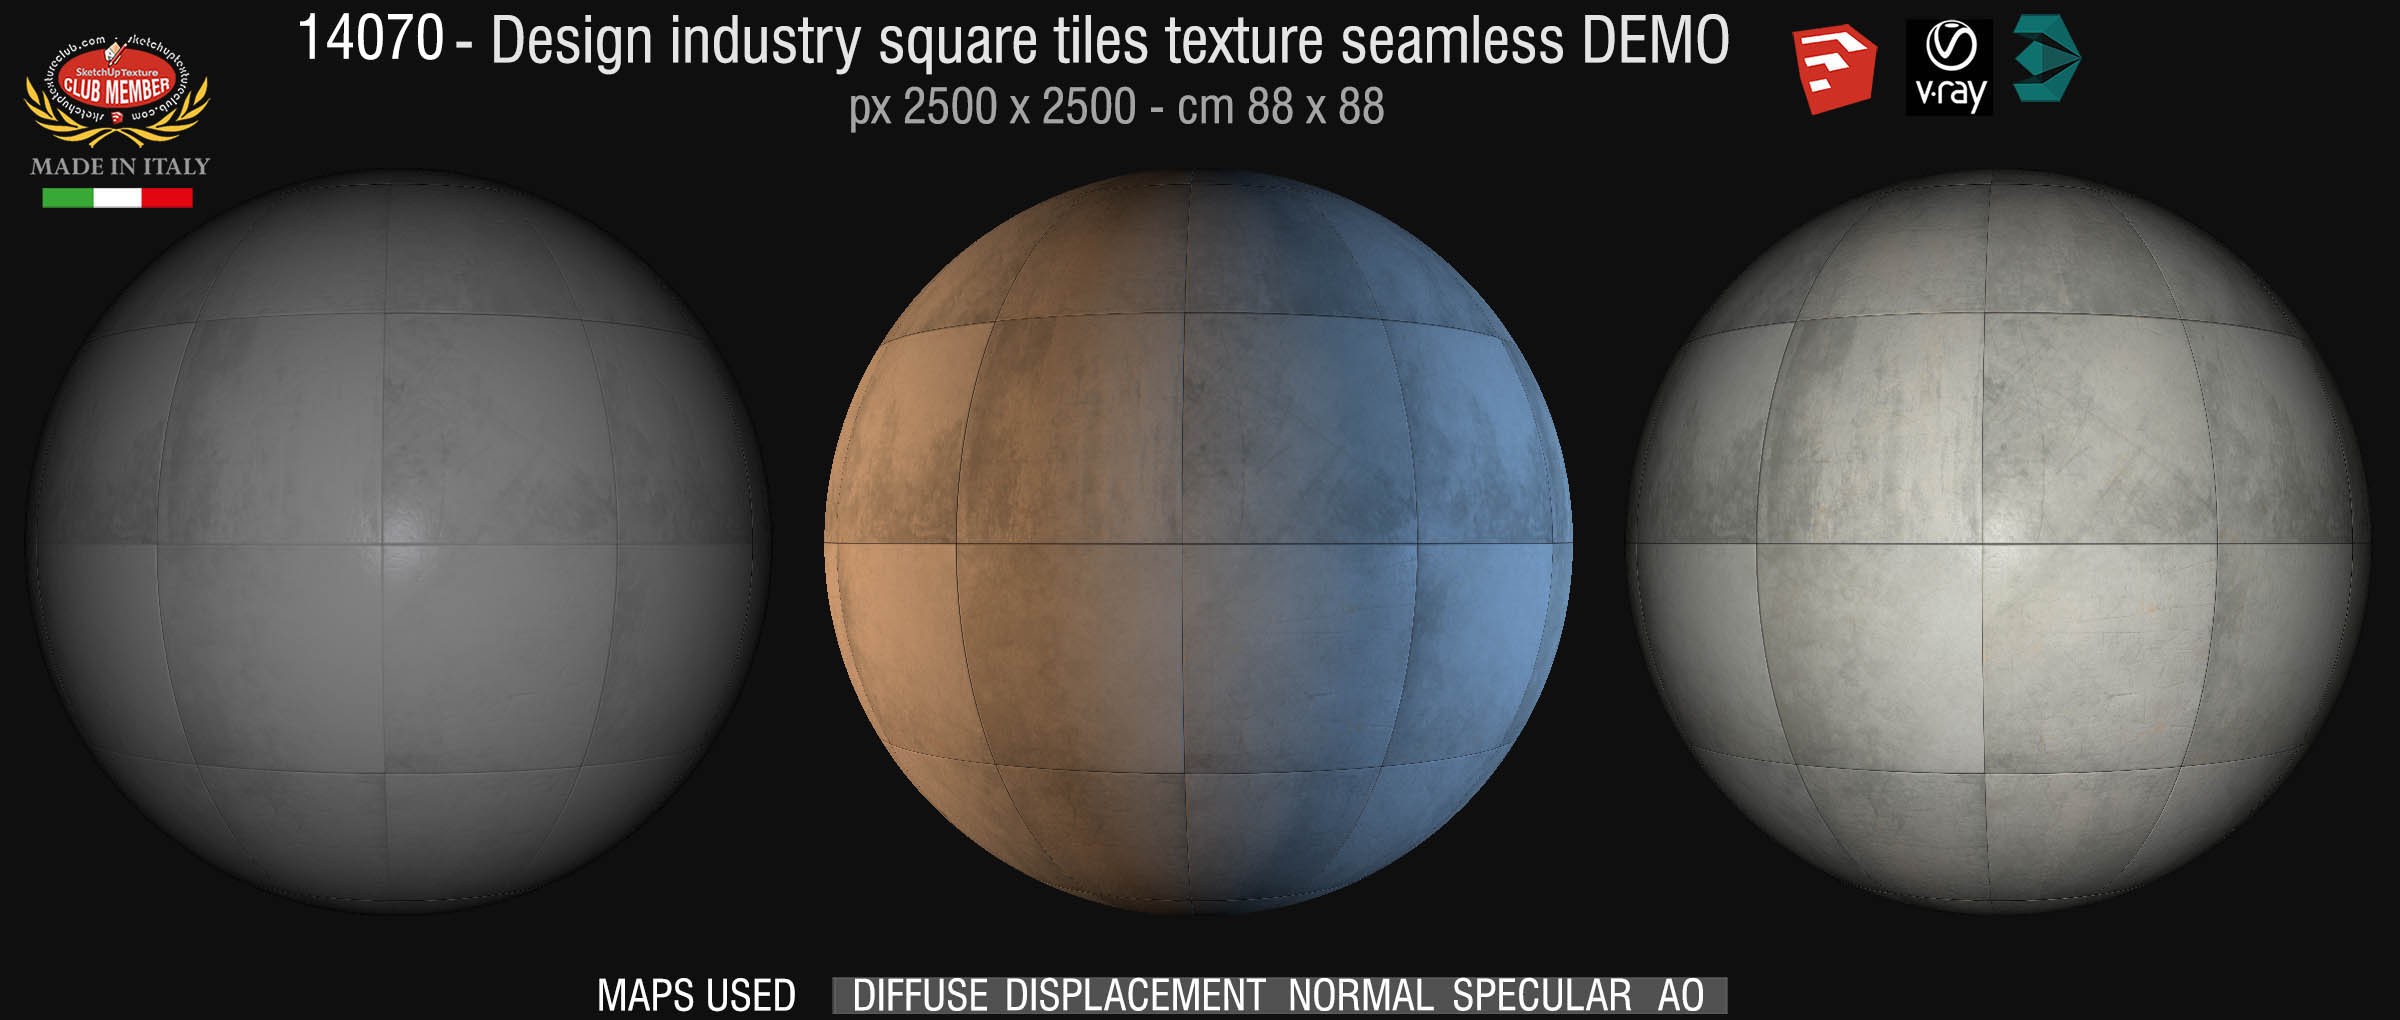 14070 Design industry square tile texture seamless + maps DEMO